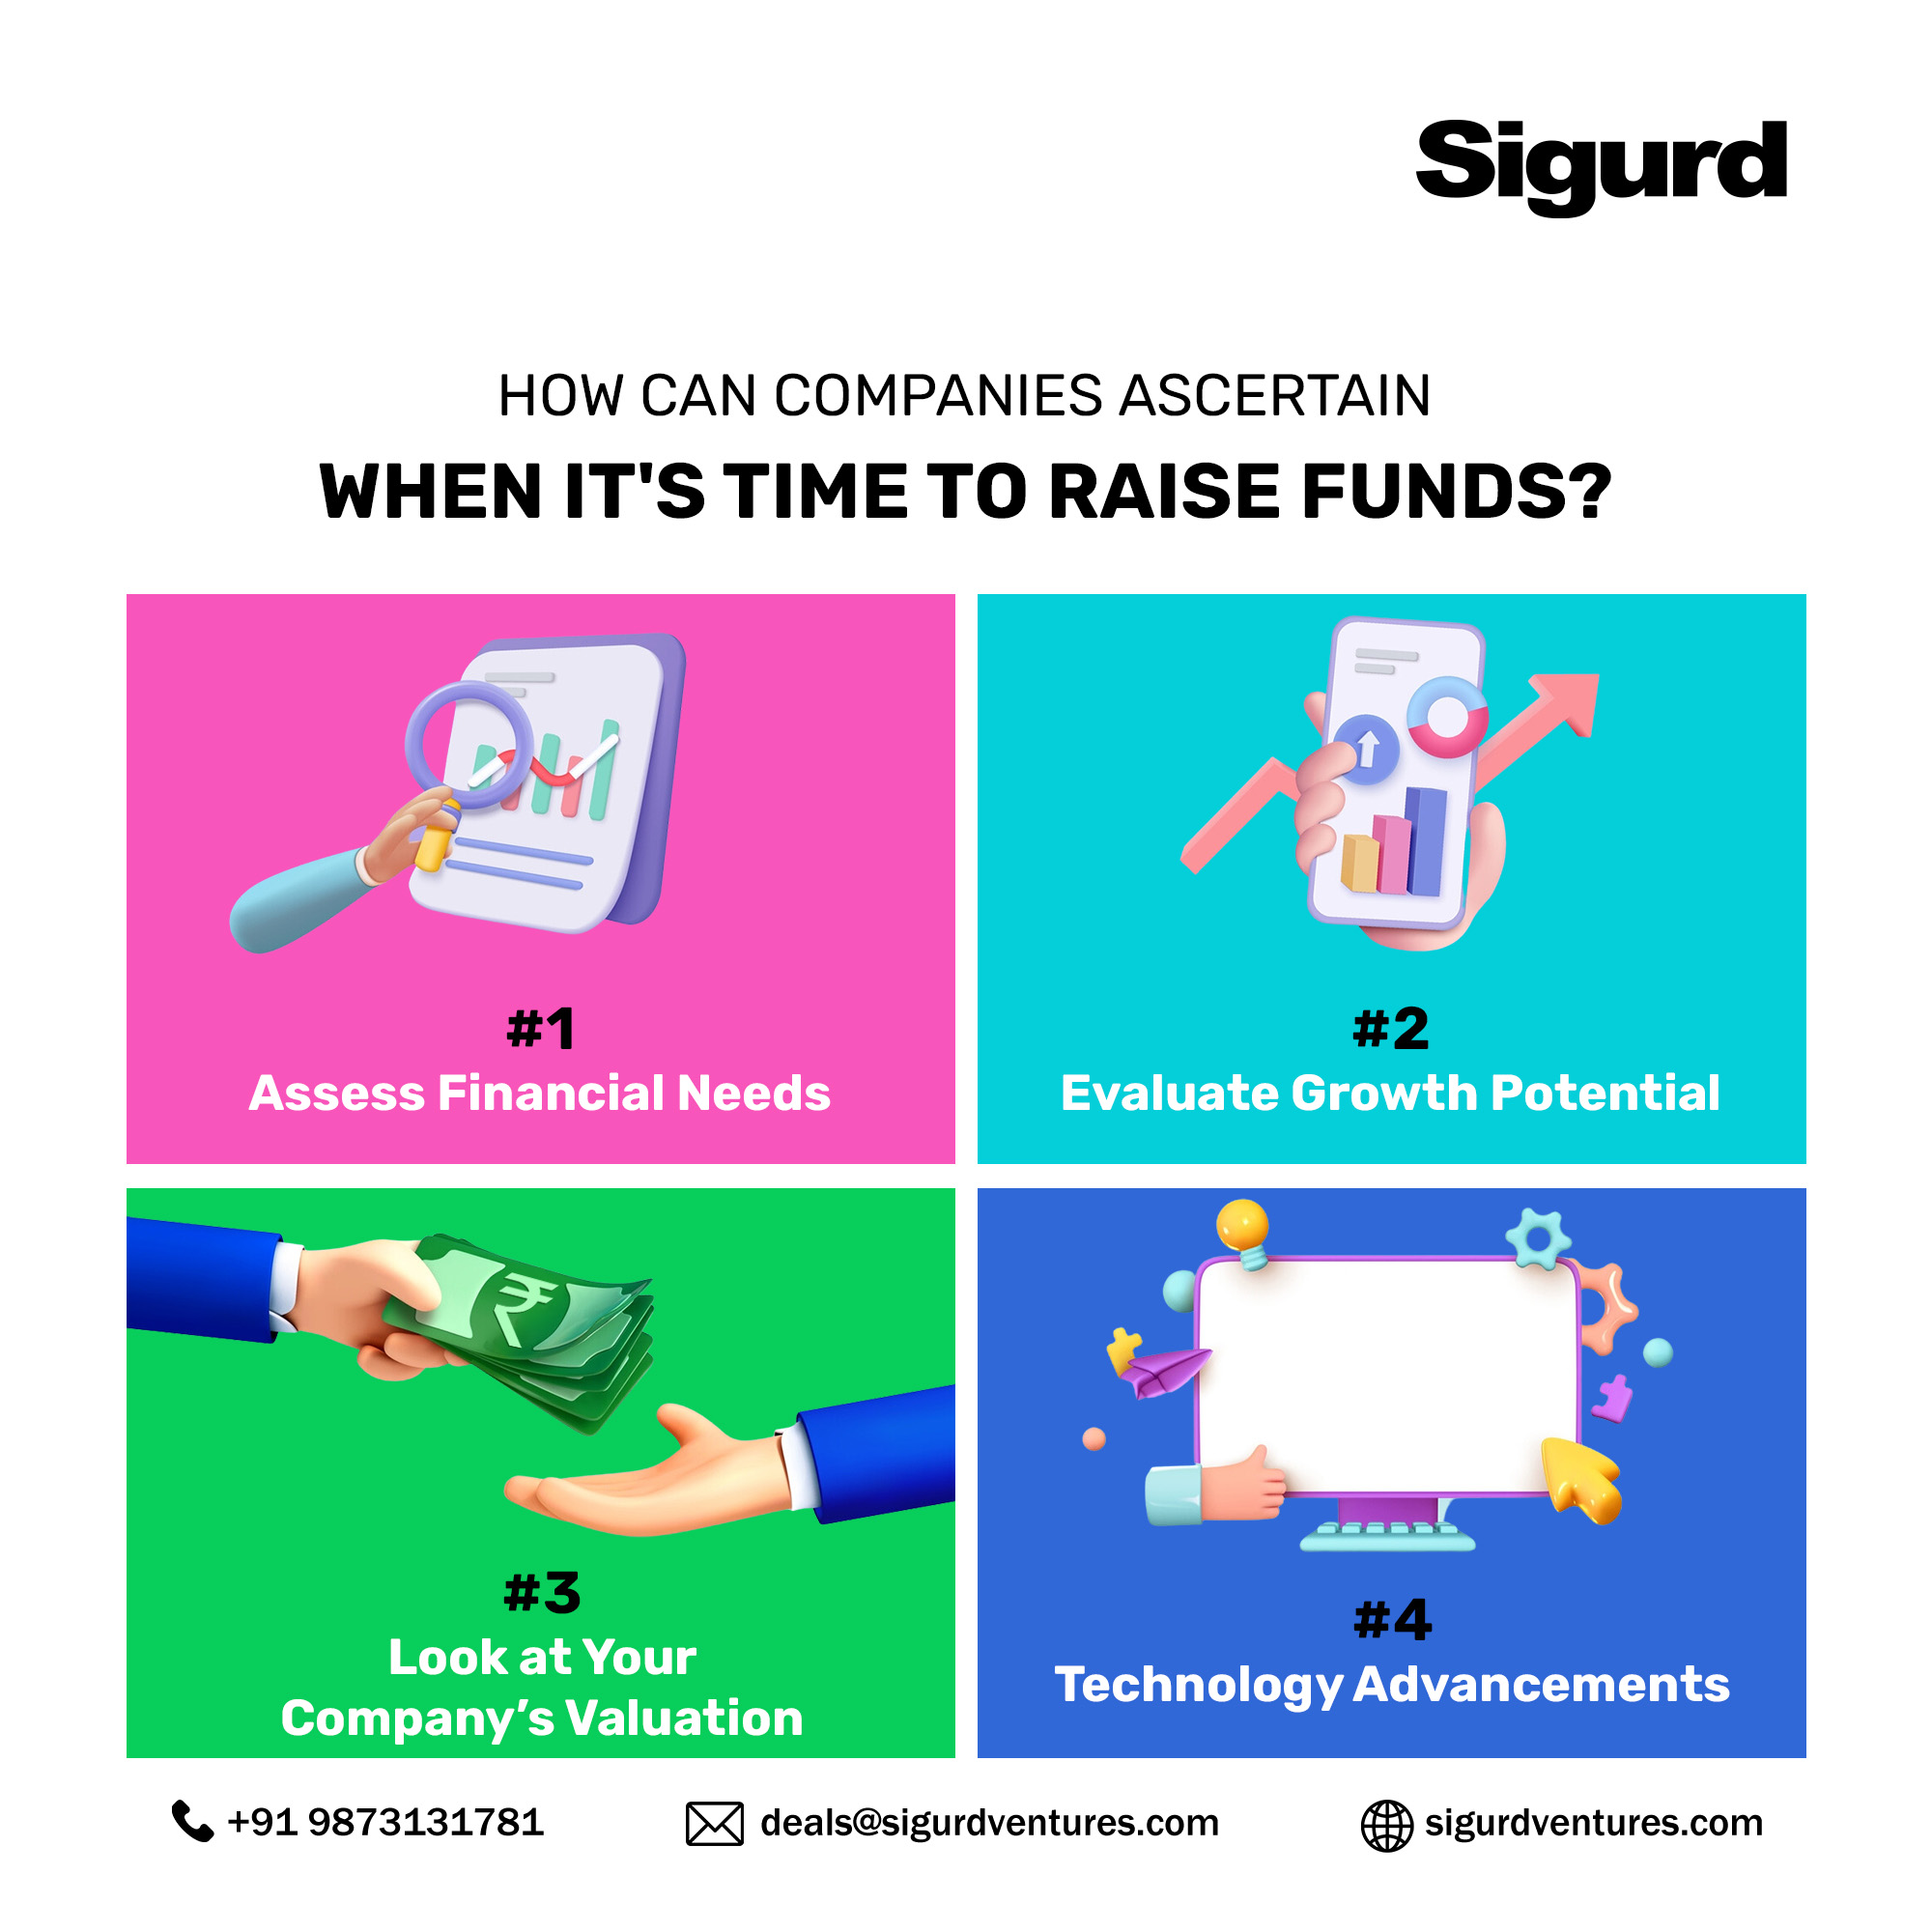 How can companies ascertain when it’s time to raise funds?